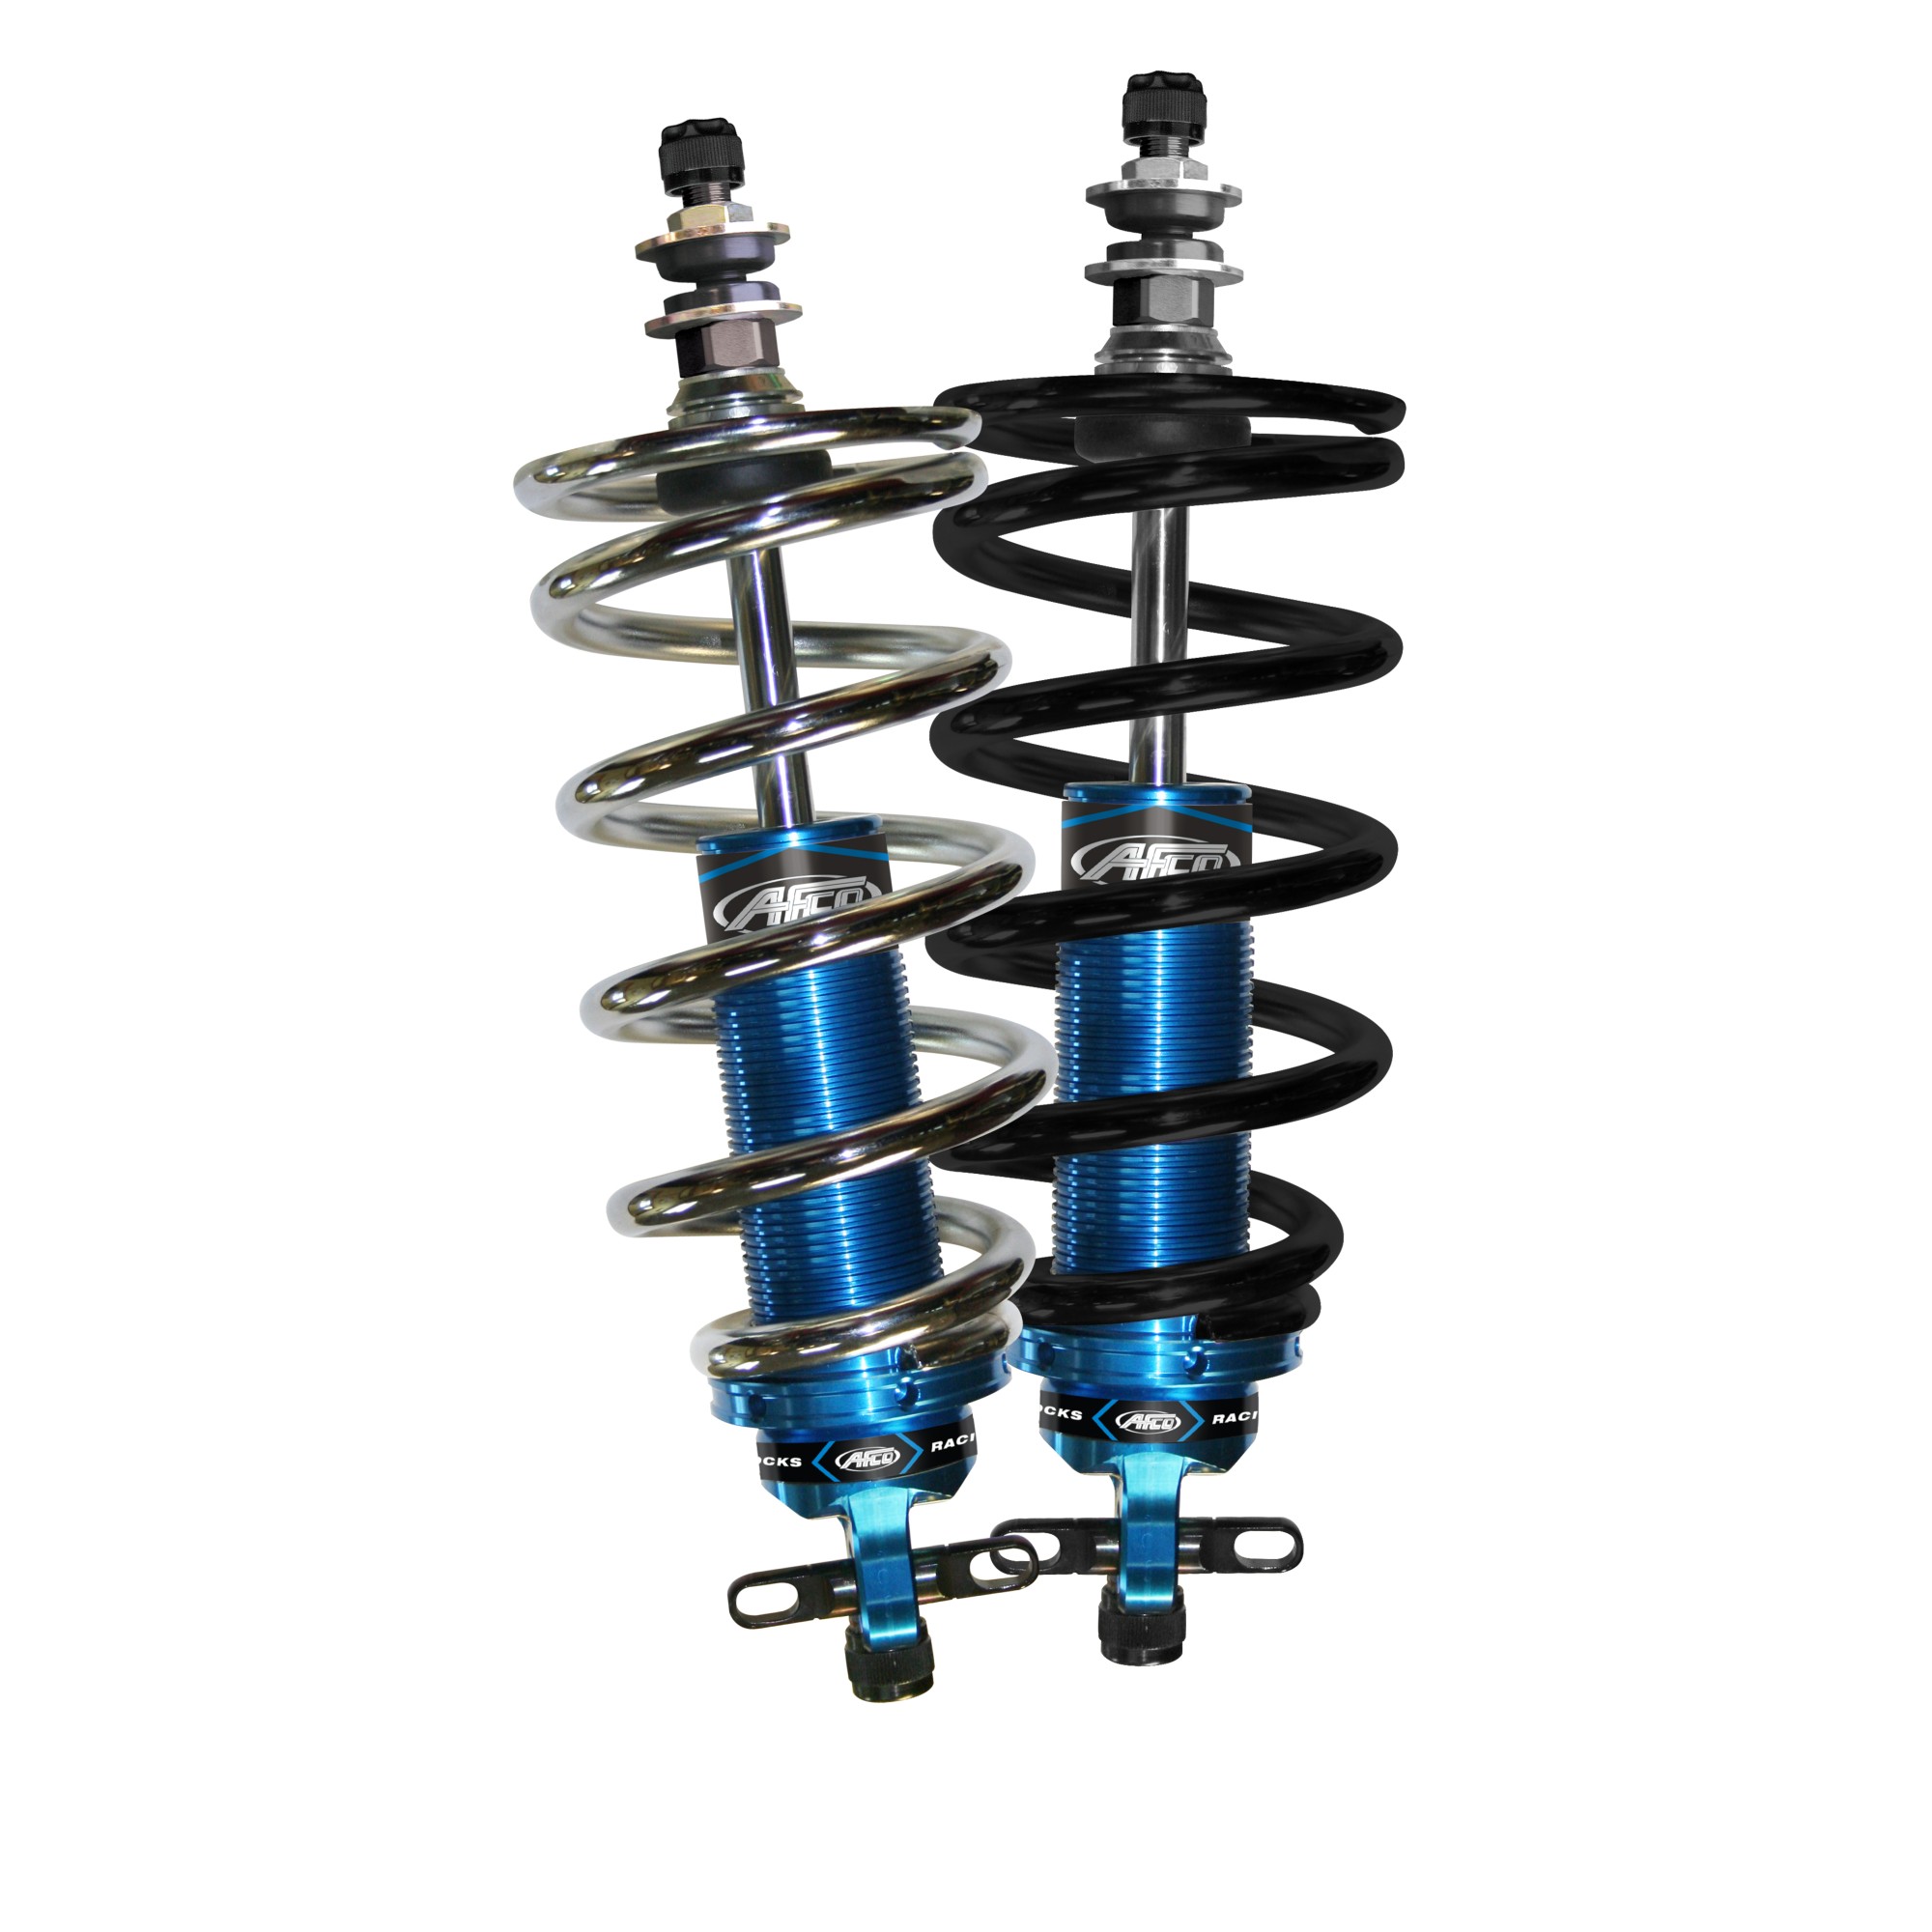 GM Double Adjustable Front Coil-over Conversion Kit Fits 68-83 Chevelle/Monte Carlo/Malibu With Small Block Engine.